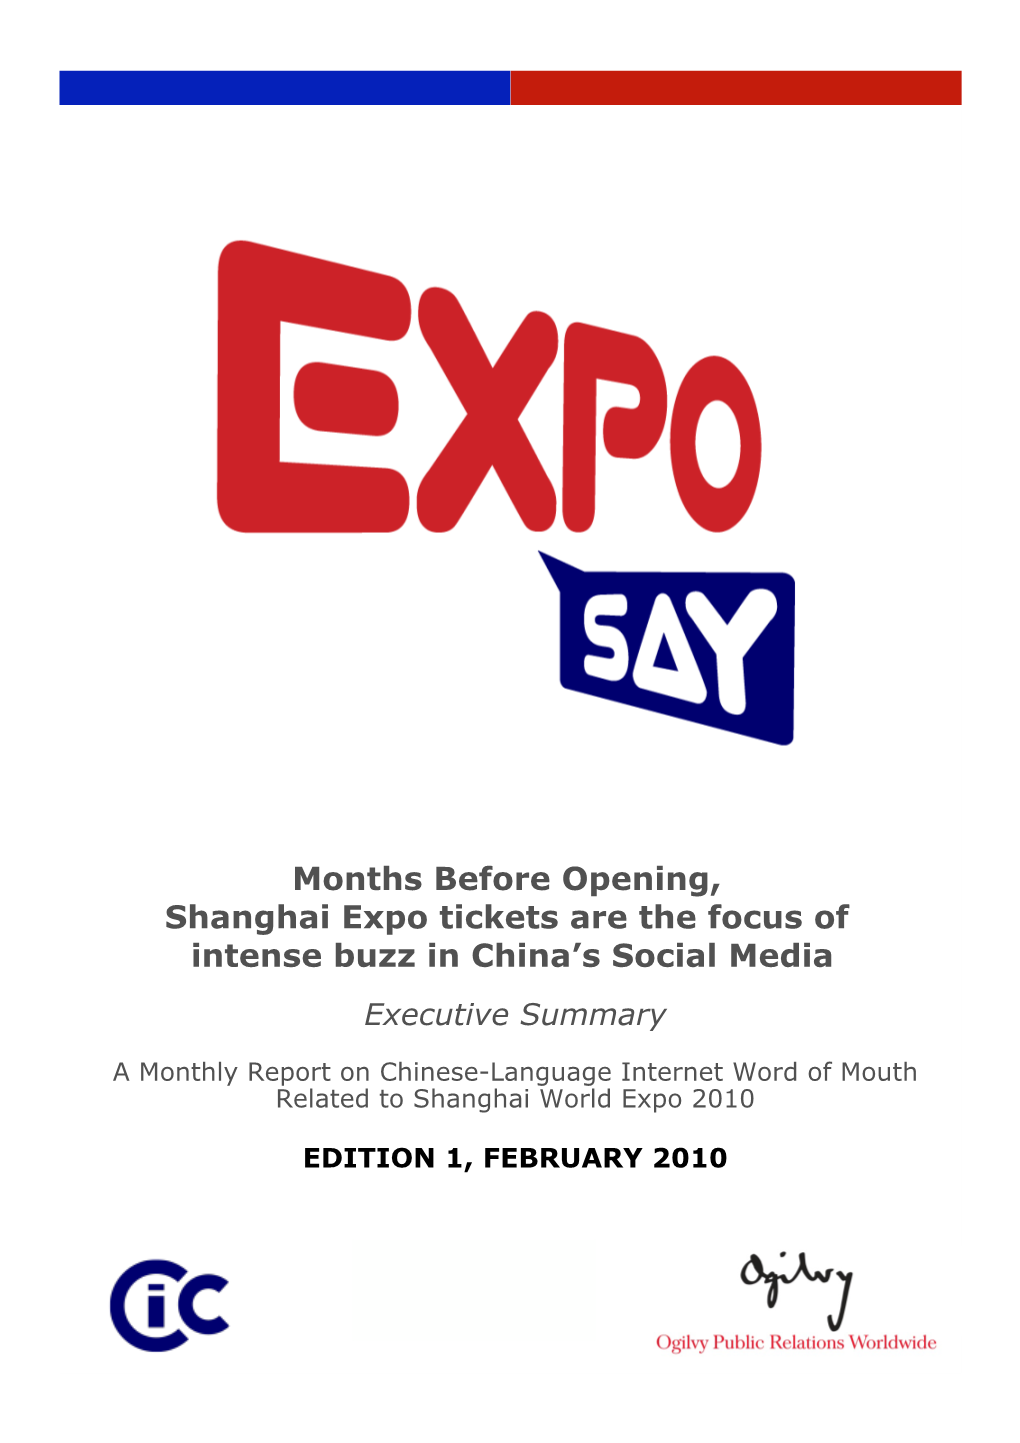 Months Before Opening, Shanghai Expo Tickets Are the Focus of Intense Buzz in China’S Social Media Executive Summary